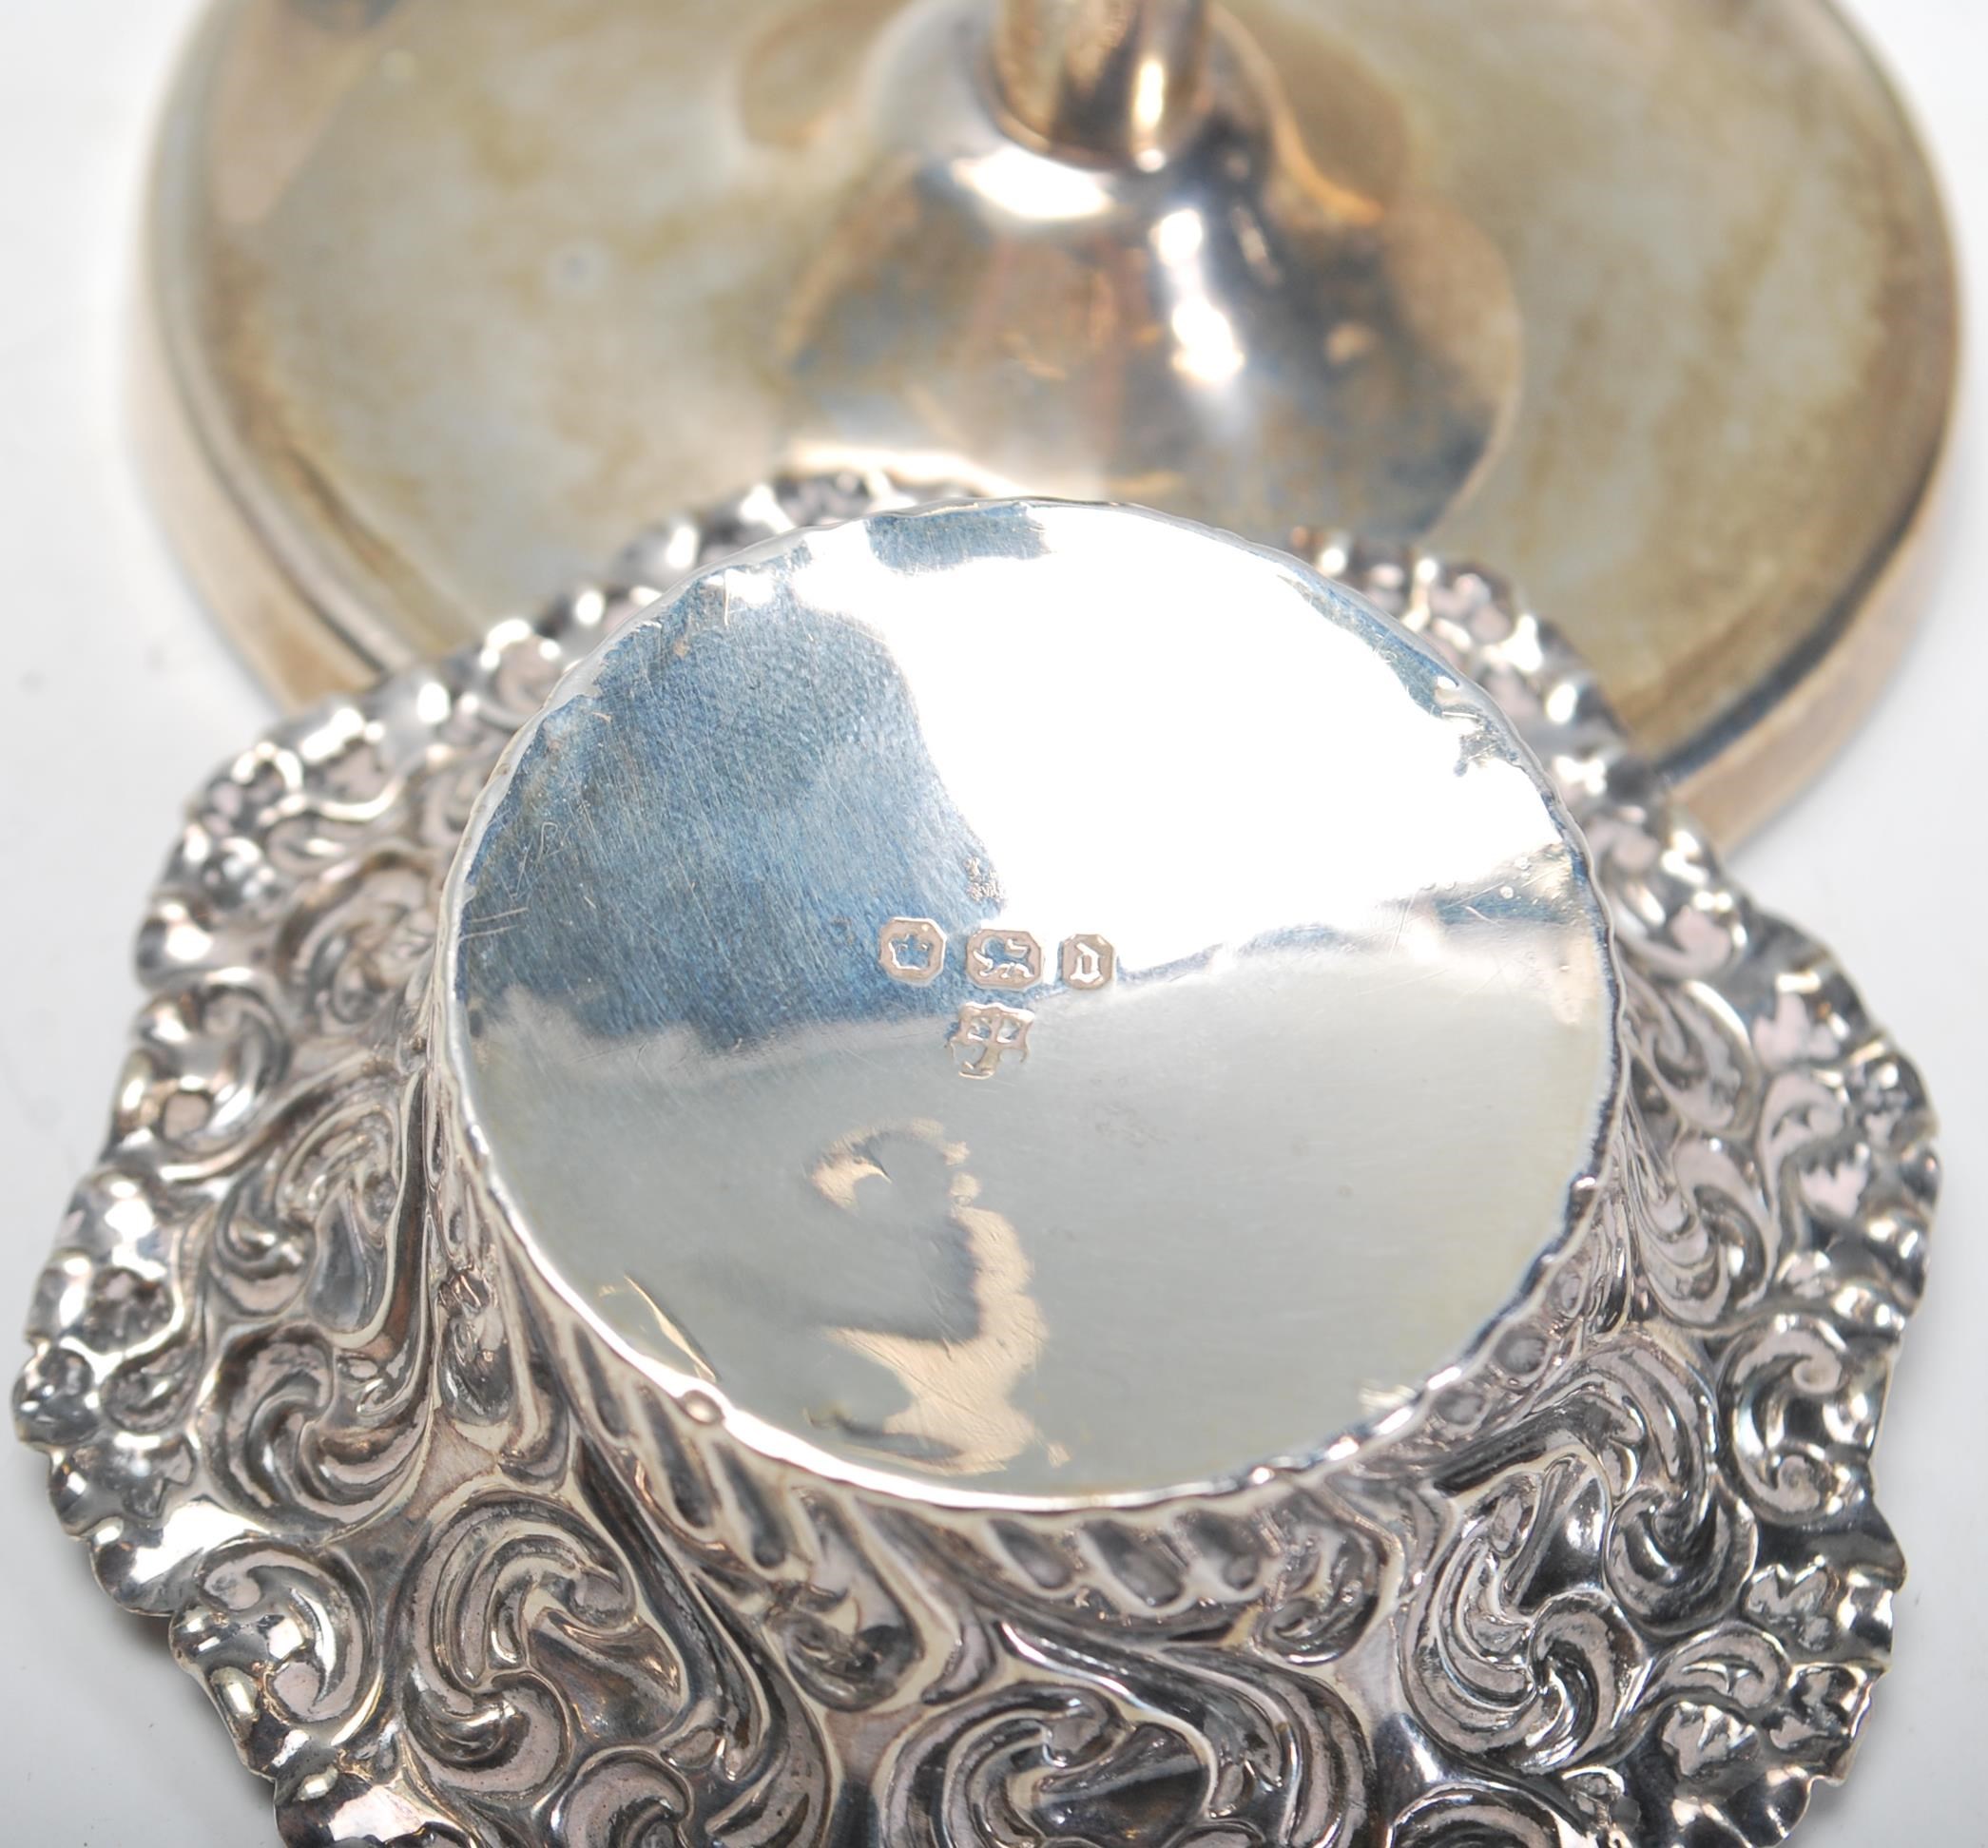 A silver hallmarked William Aitkin ring stand in the form of a tree in a round dish / base ( - Image 5 of 5